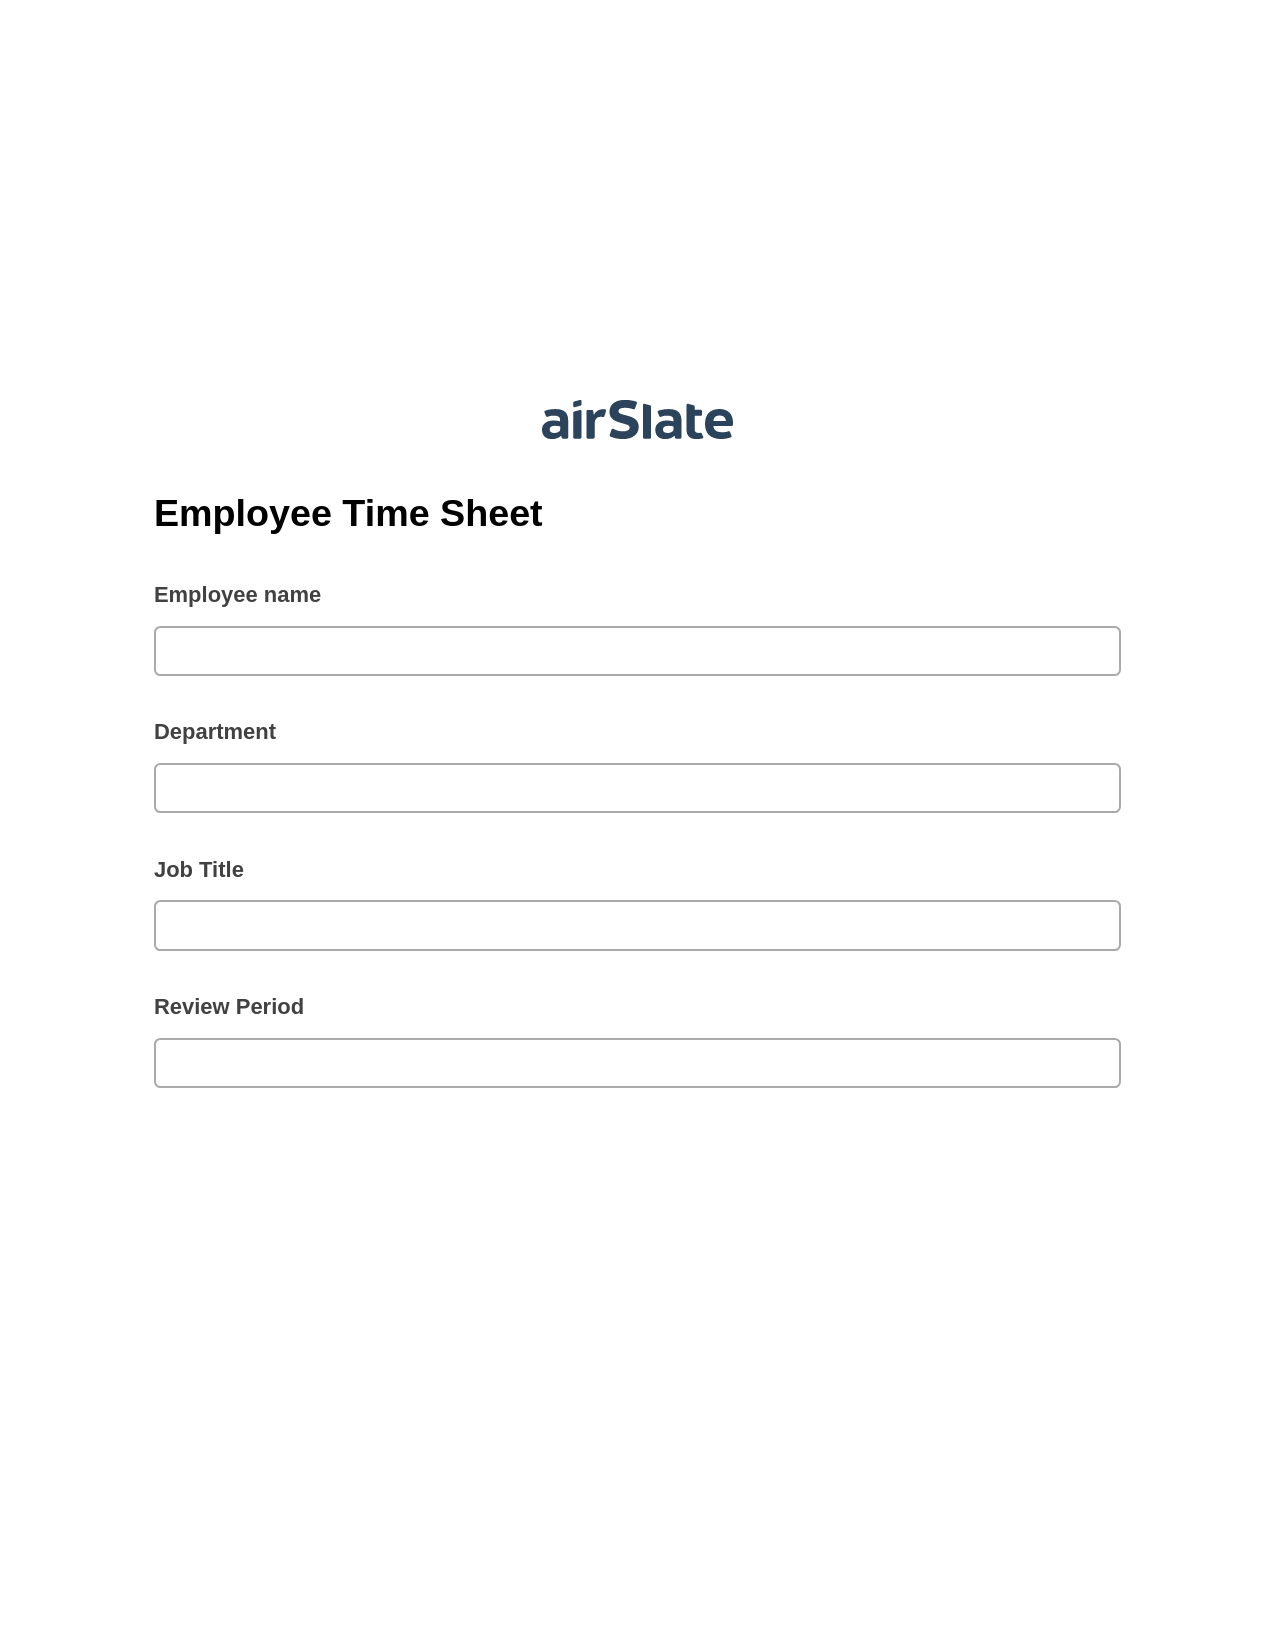 Employee Time Sheet Pre-fill Dropdowns from Smartsheet Bot, Send Mailchimp Campaign Bot, Archive to SharePoint Folder Bot